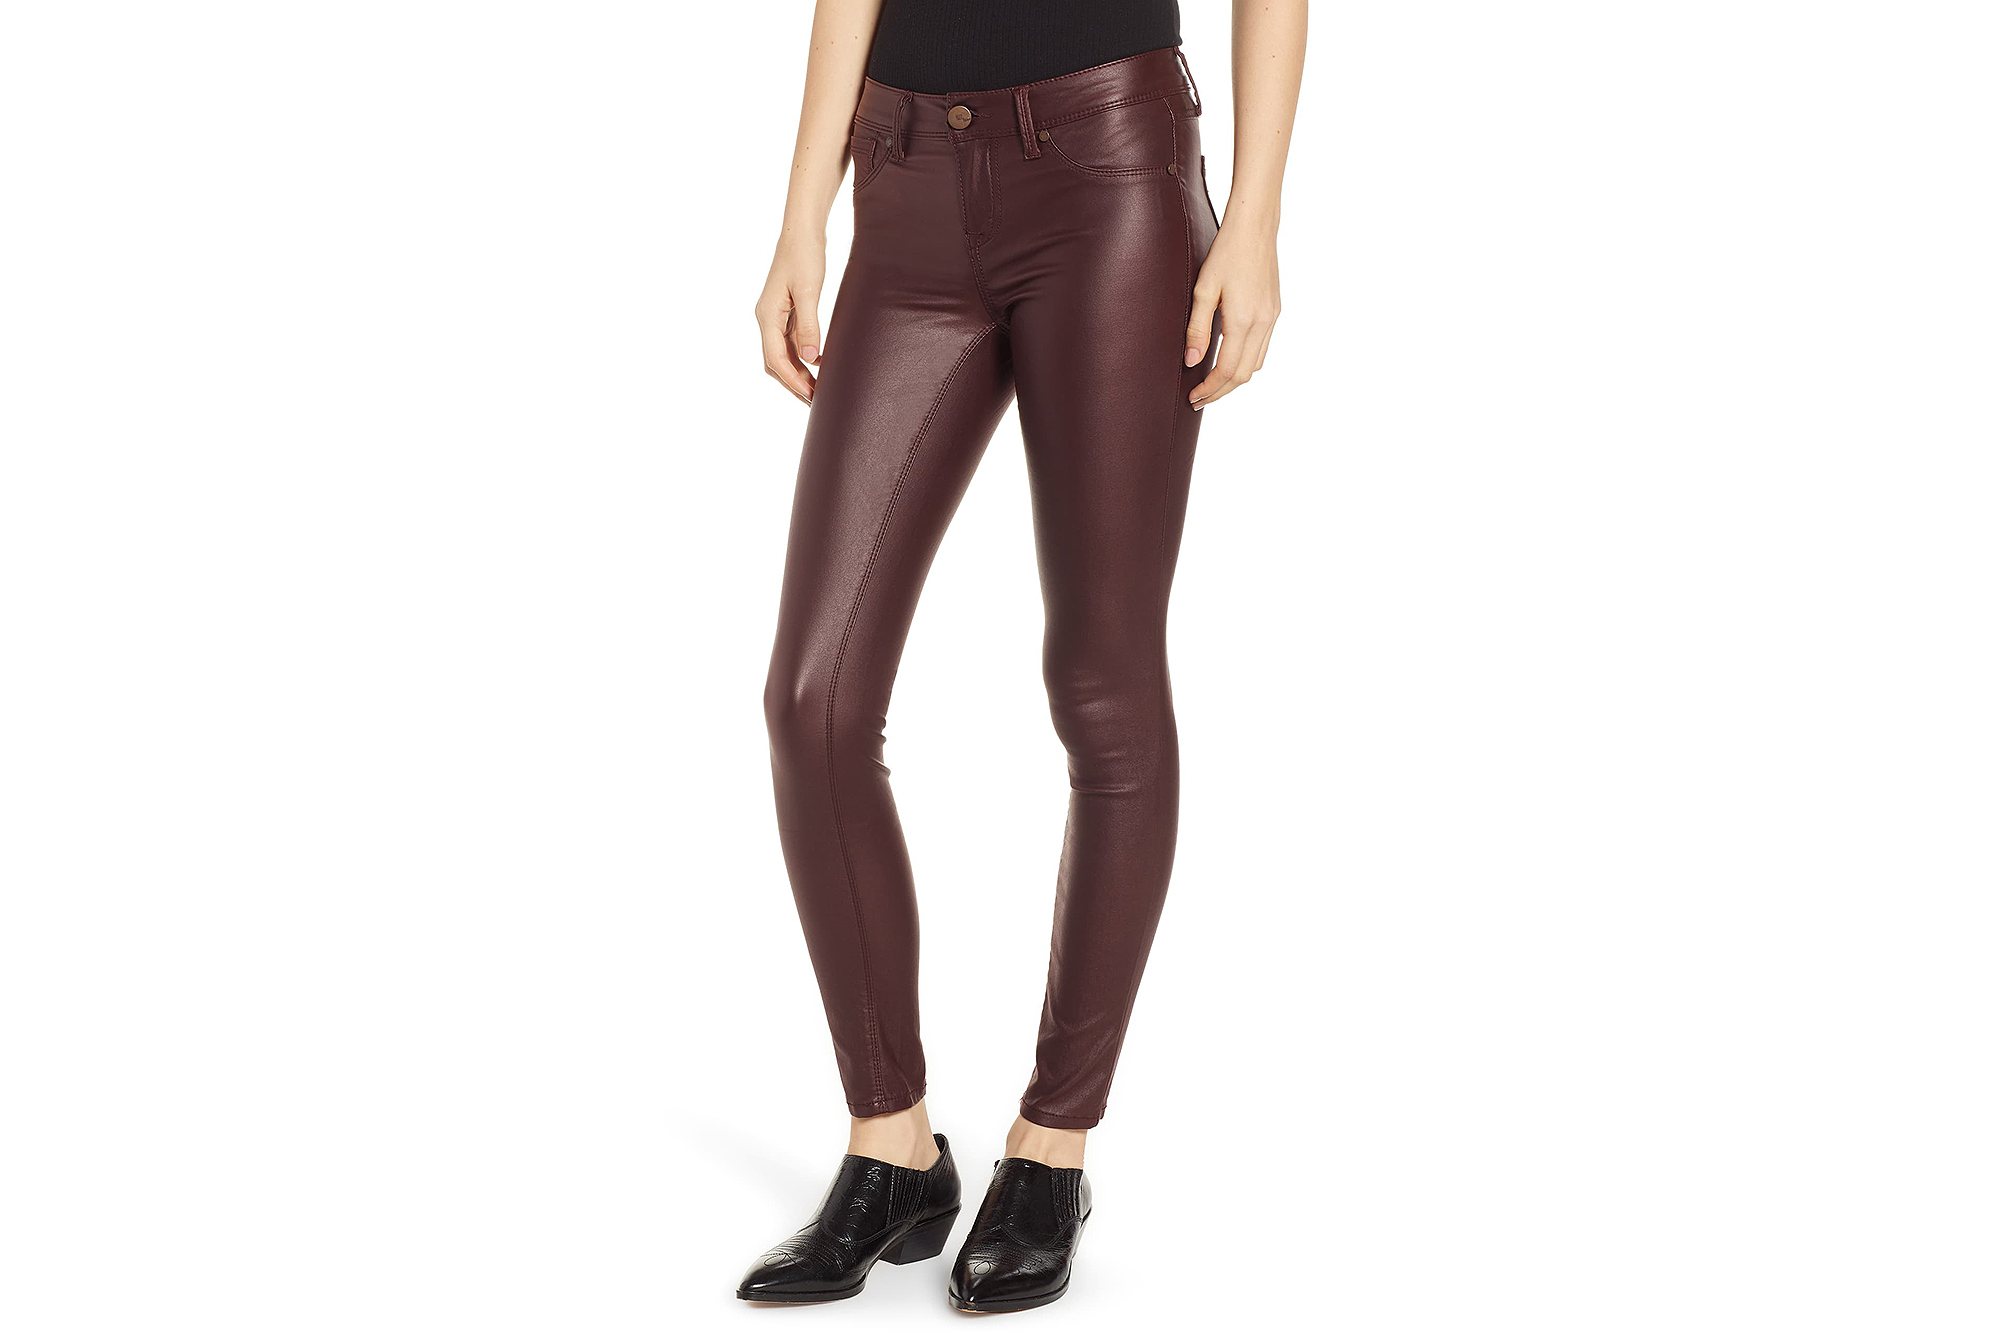 These Affordable 1822 Denim Skinny Jeans Look Like Leather Pants